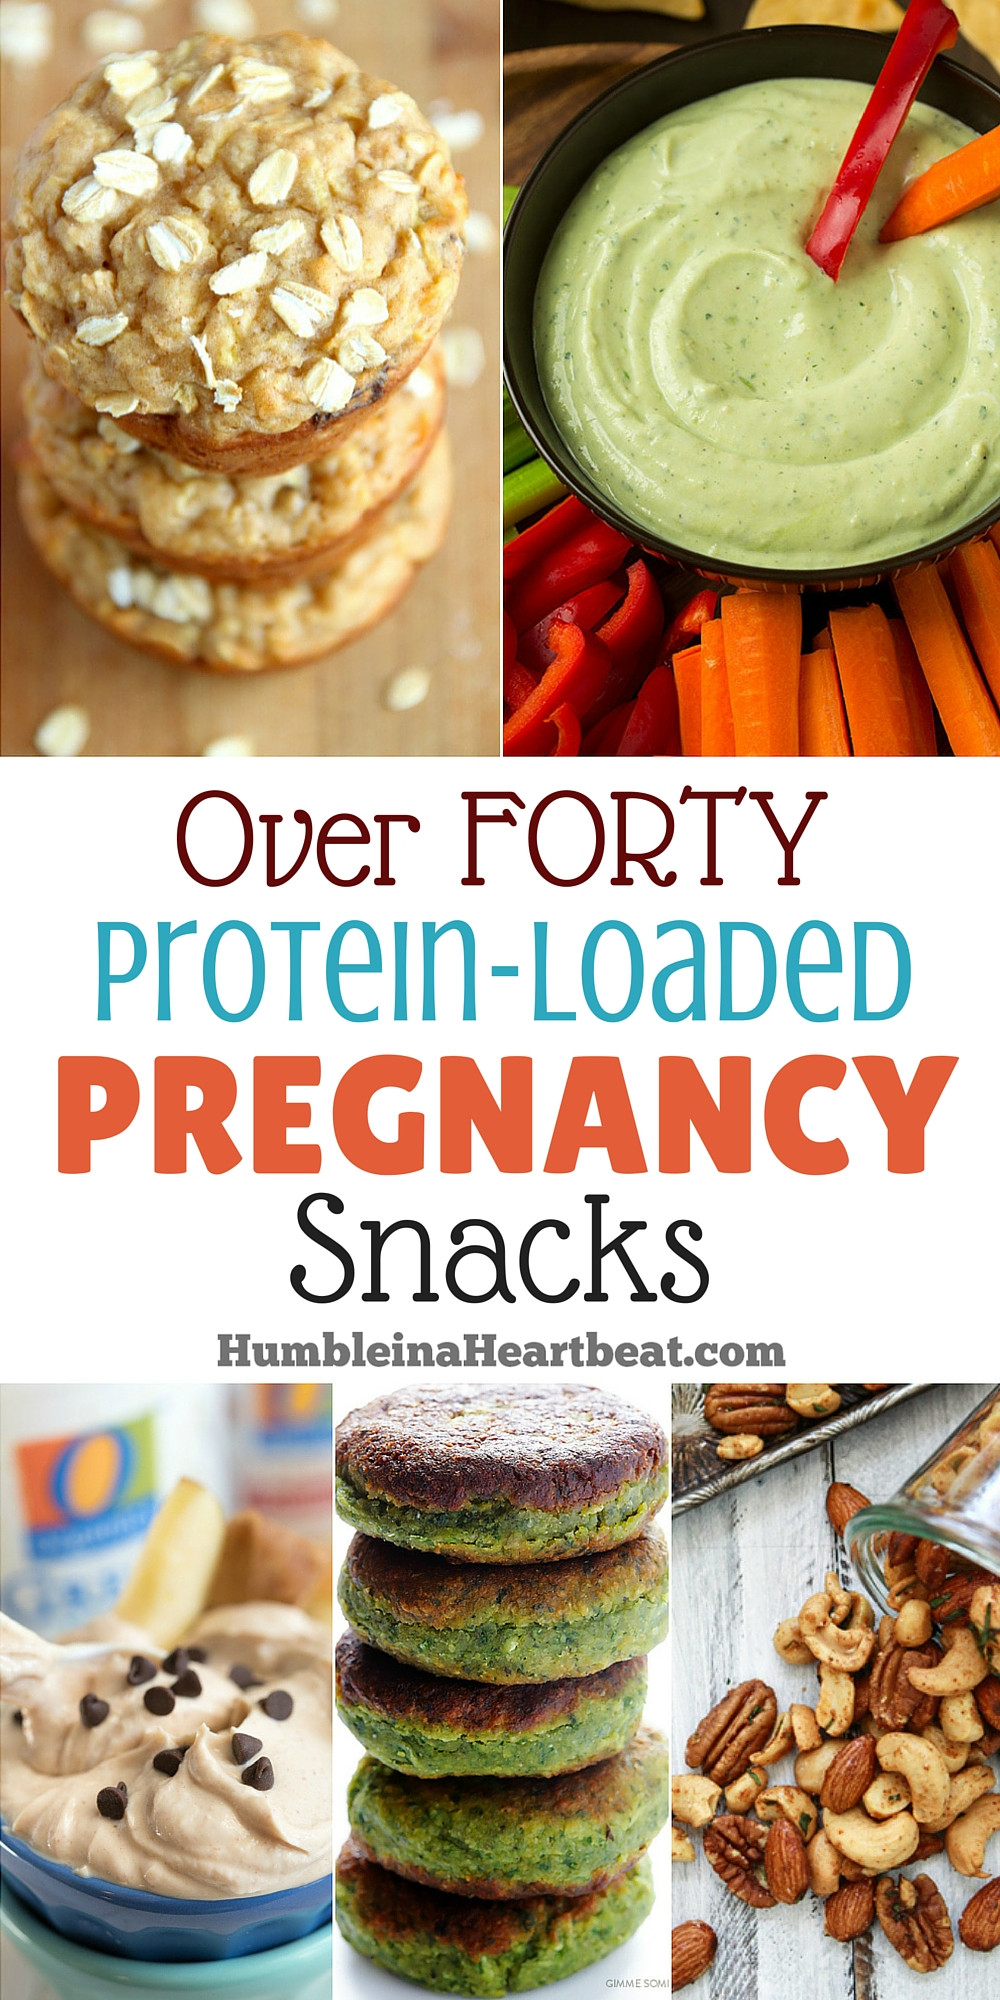 Healthy Snacks While Breastfeeding
 40 Amazing Pregnancy Snacks with Tons of Protein